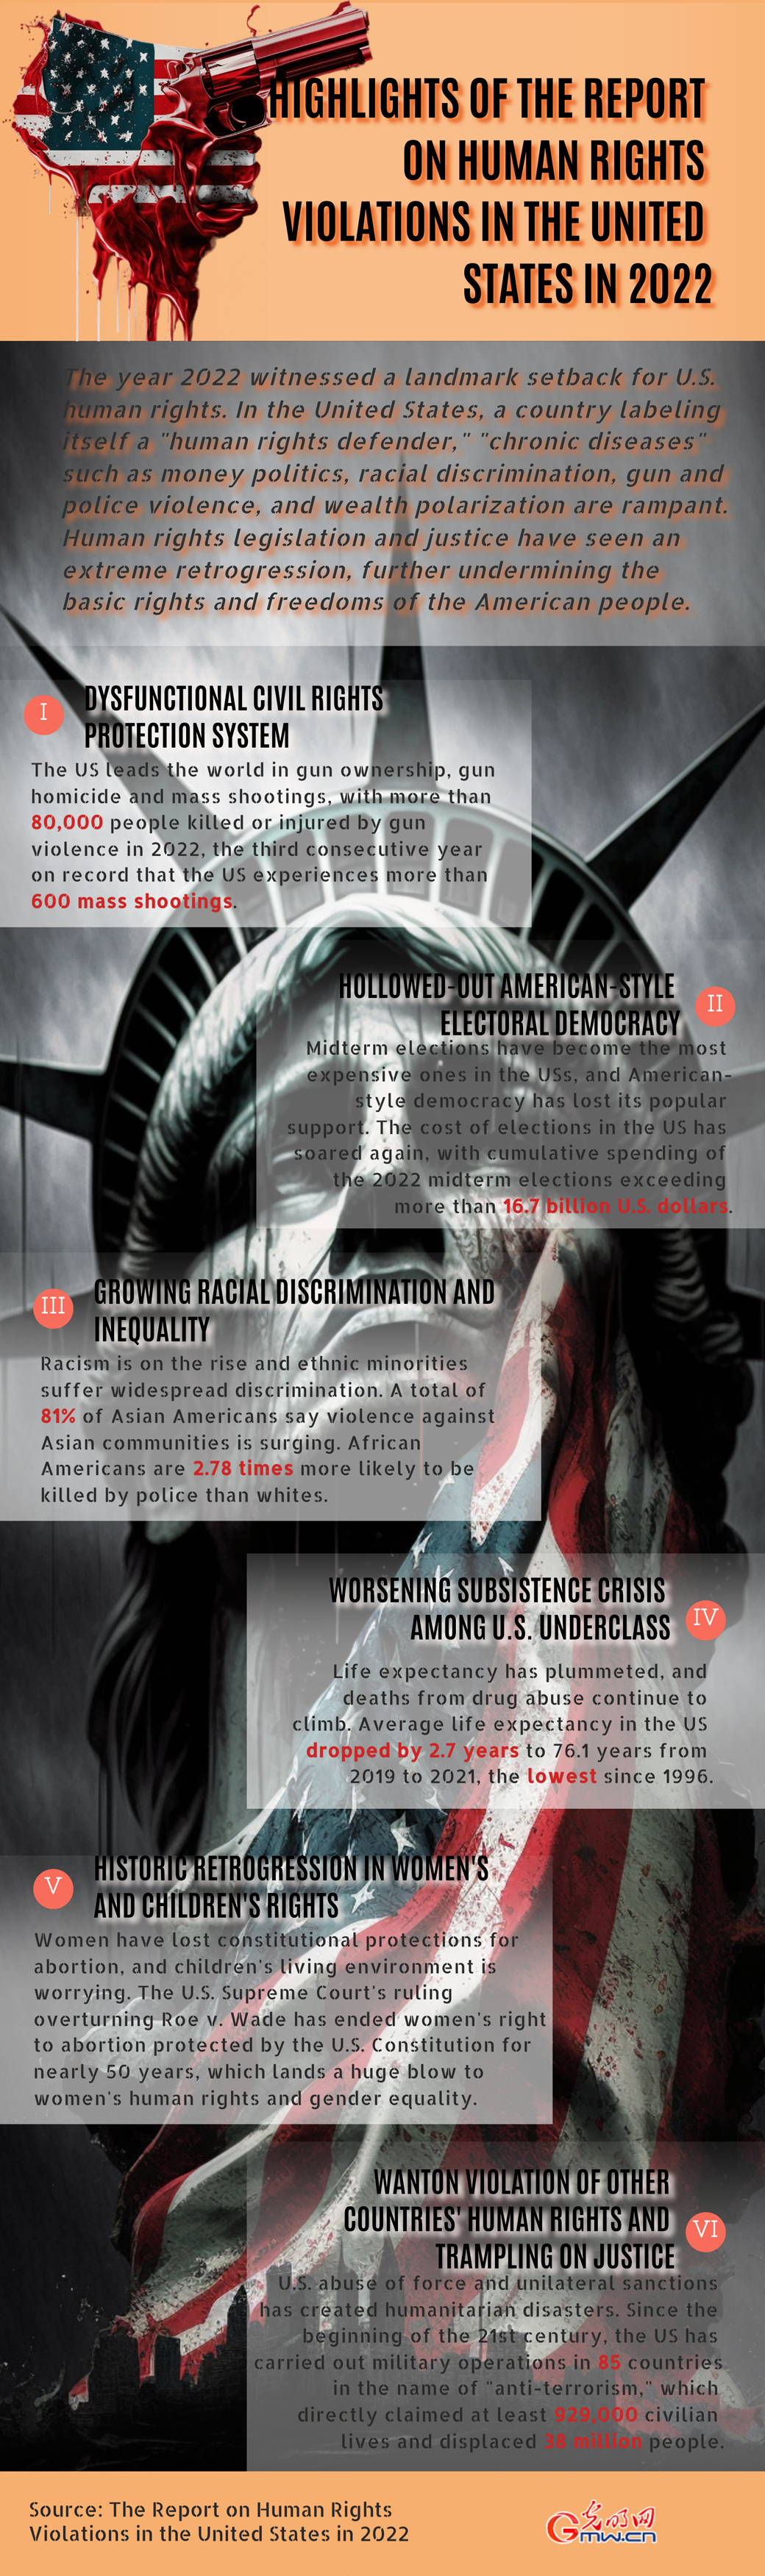 Highlights of The Report on Human Rights Violations in the United States in 2022